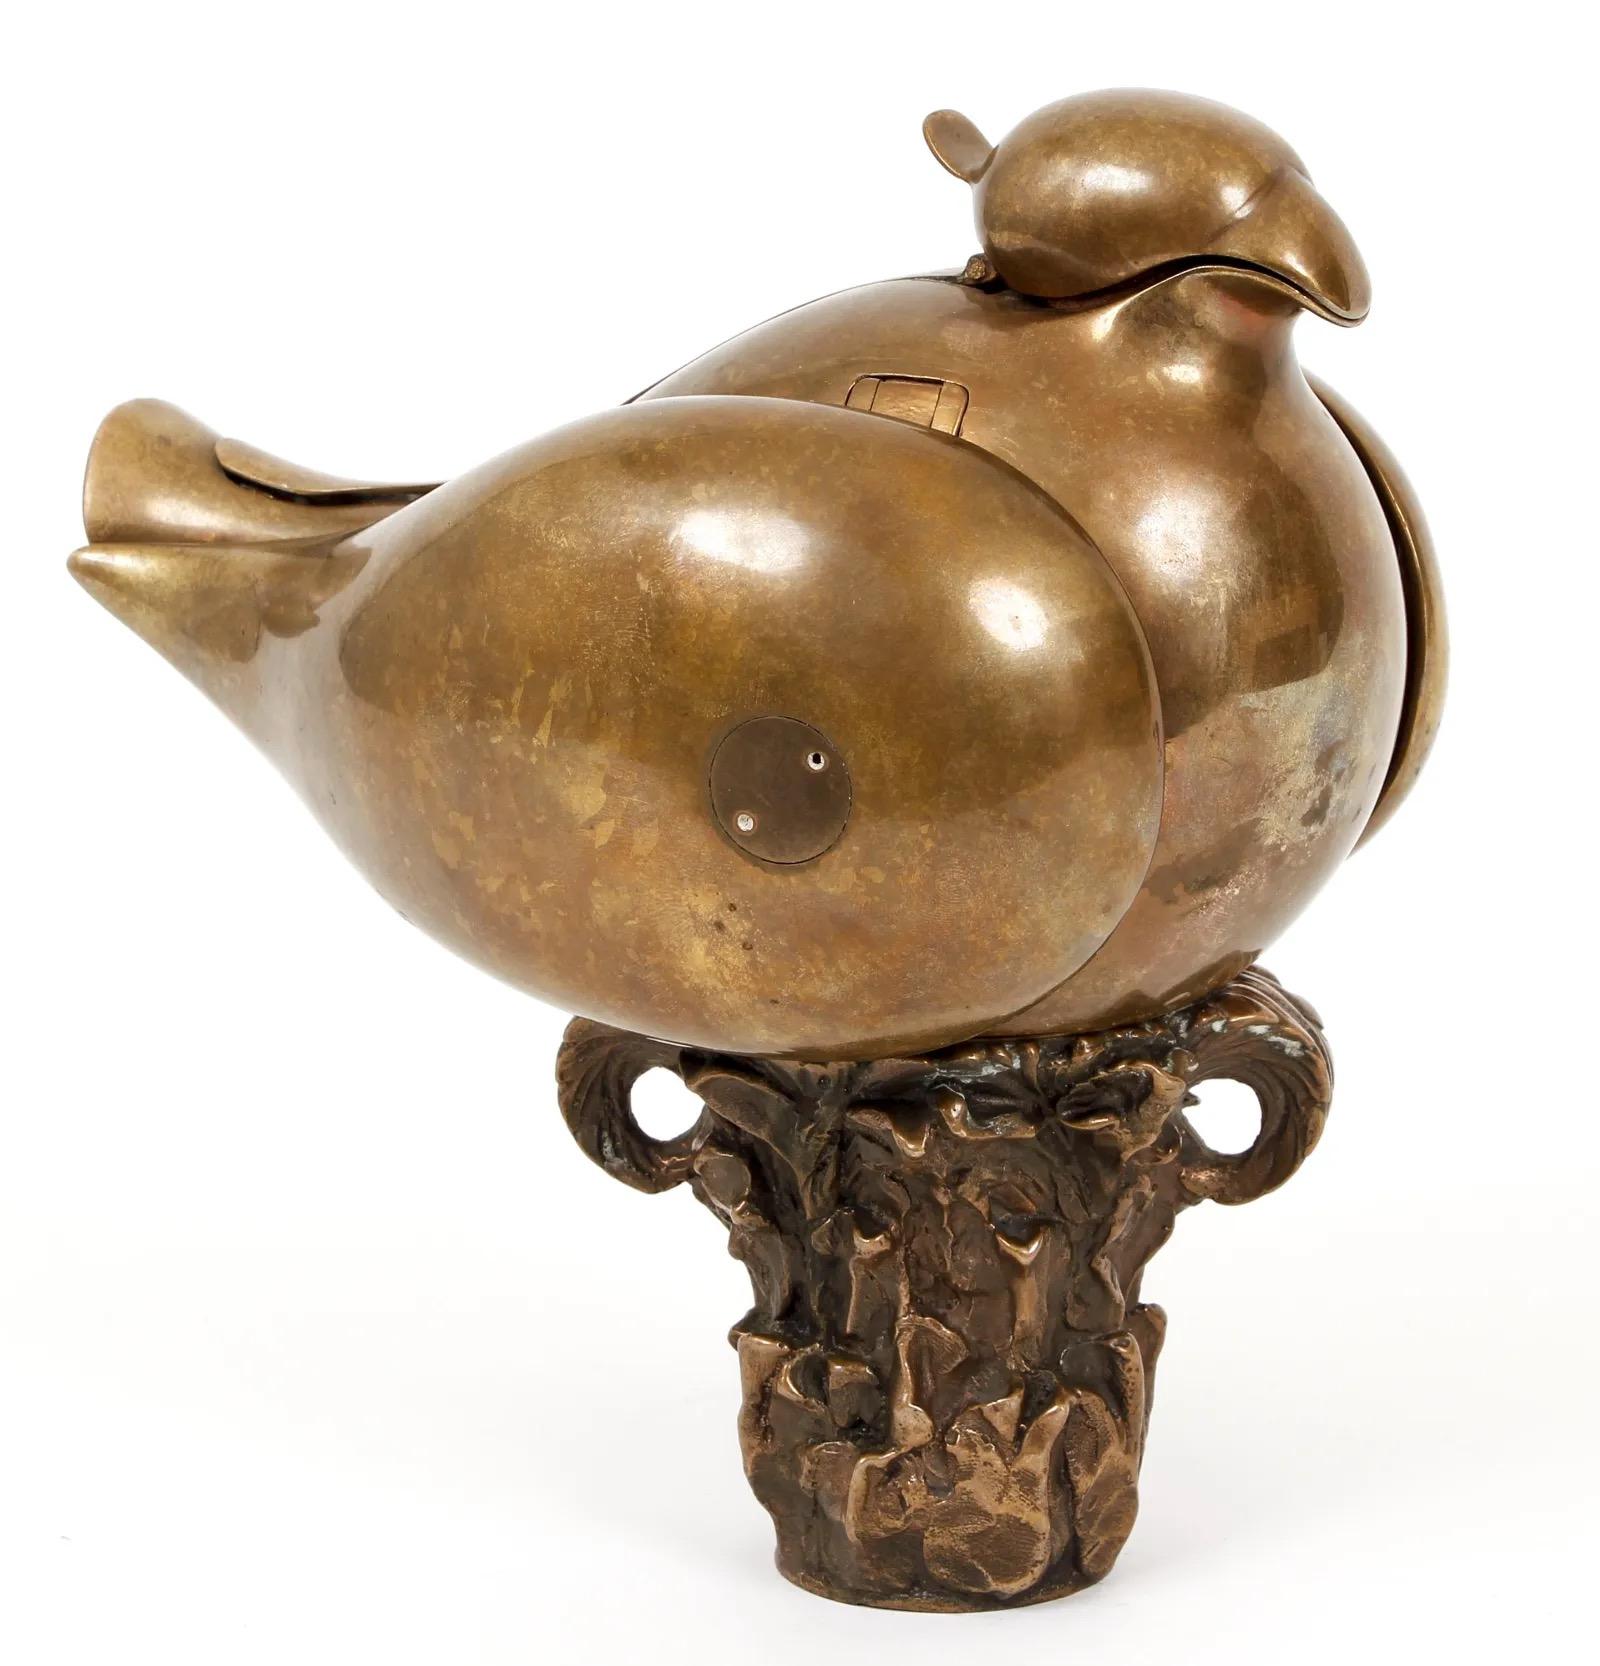 Paloma jet (Dove) teapot, by Miguel Berrocal (Spanish, 1933-2006) made in 1976. The piece is made of bronze with original brass base, and artist’s signature etched on tail, fully extendable.
       